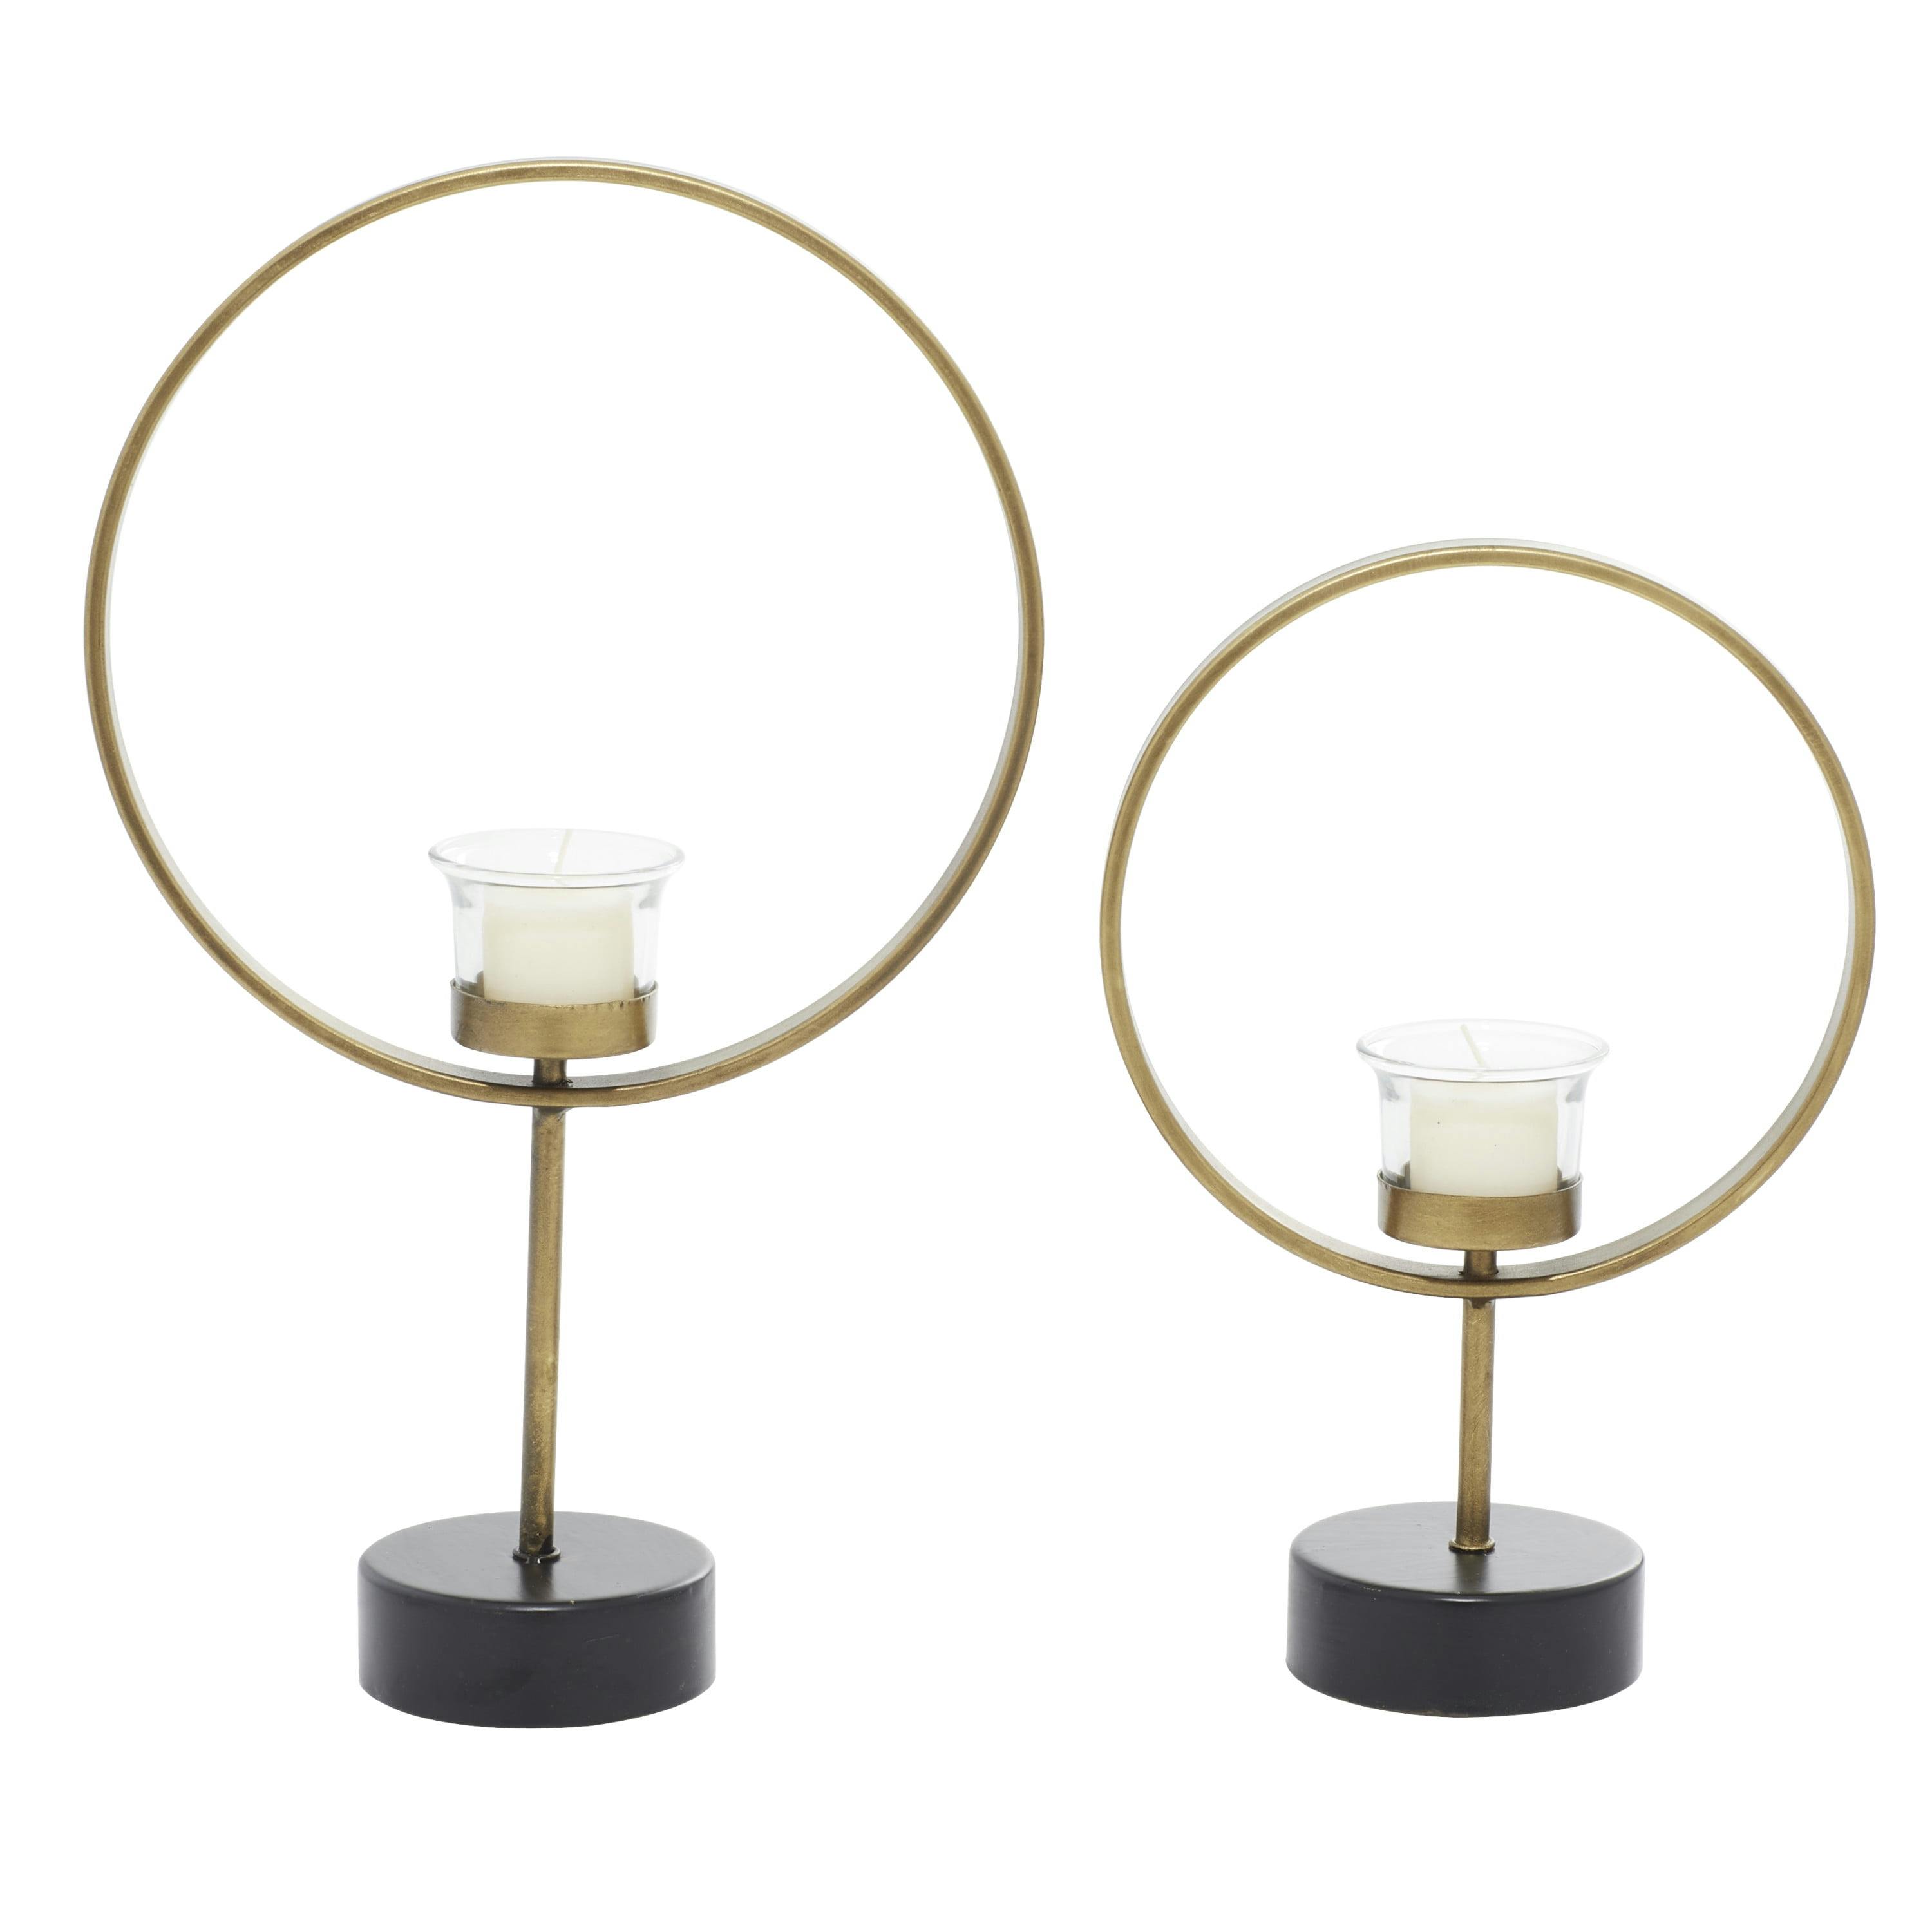 Radiant Gold Circular Votive Candle Holder Set with Glass Accents